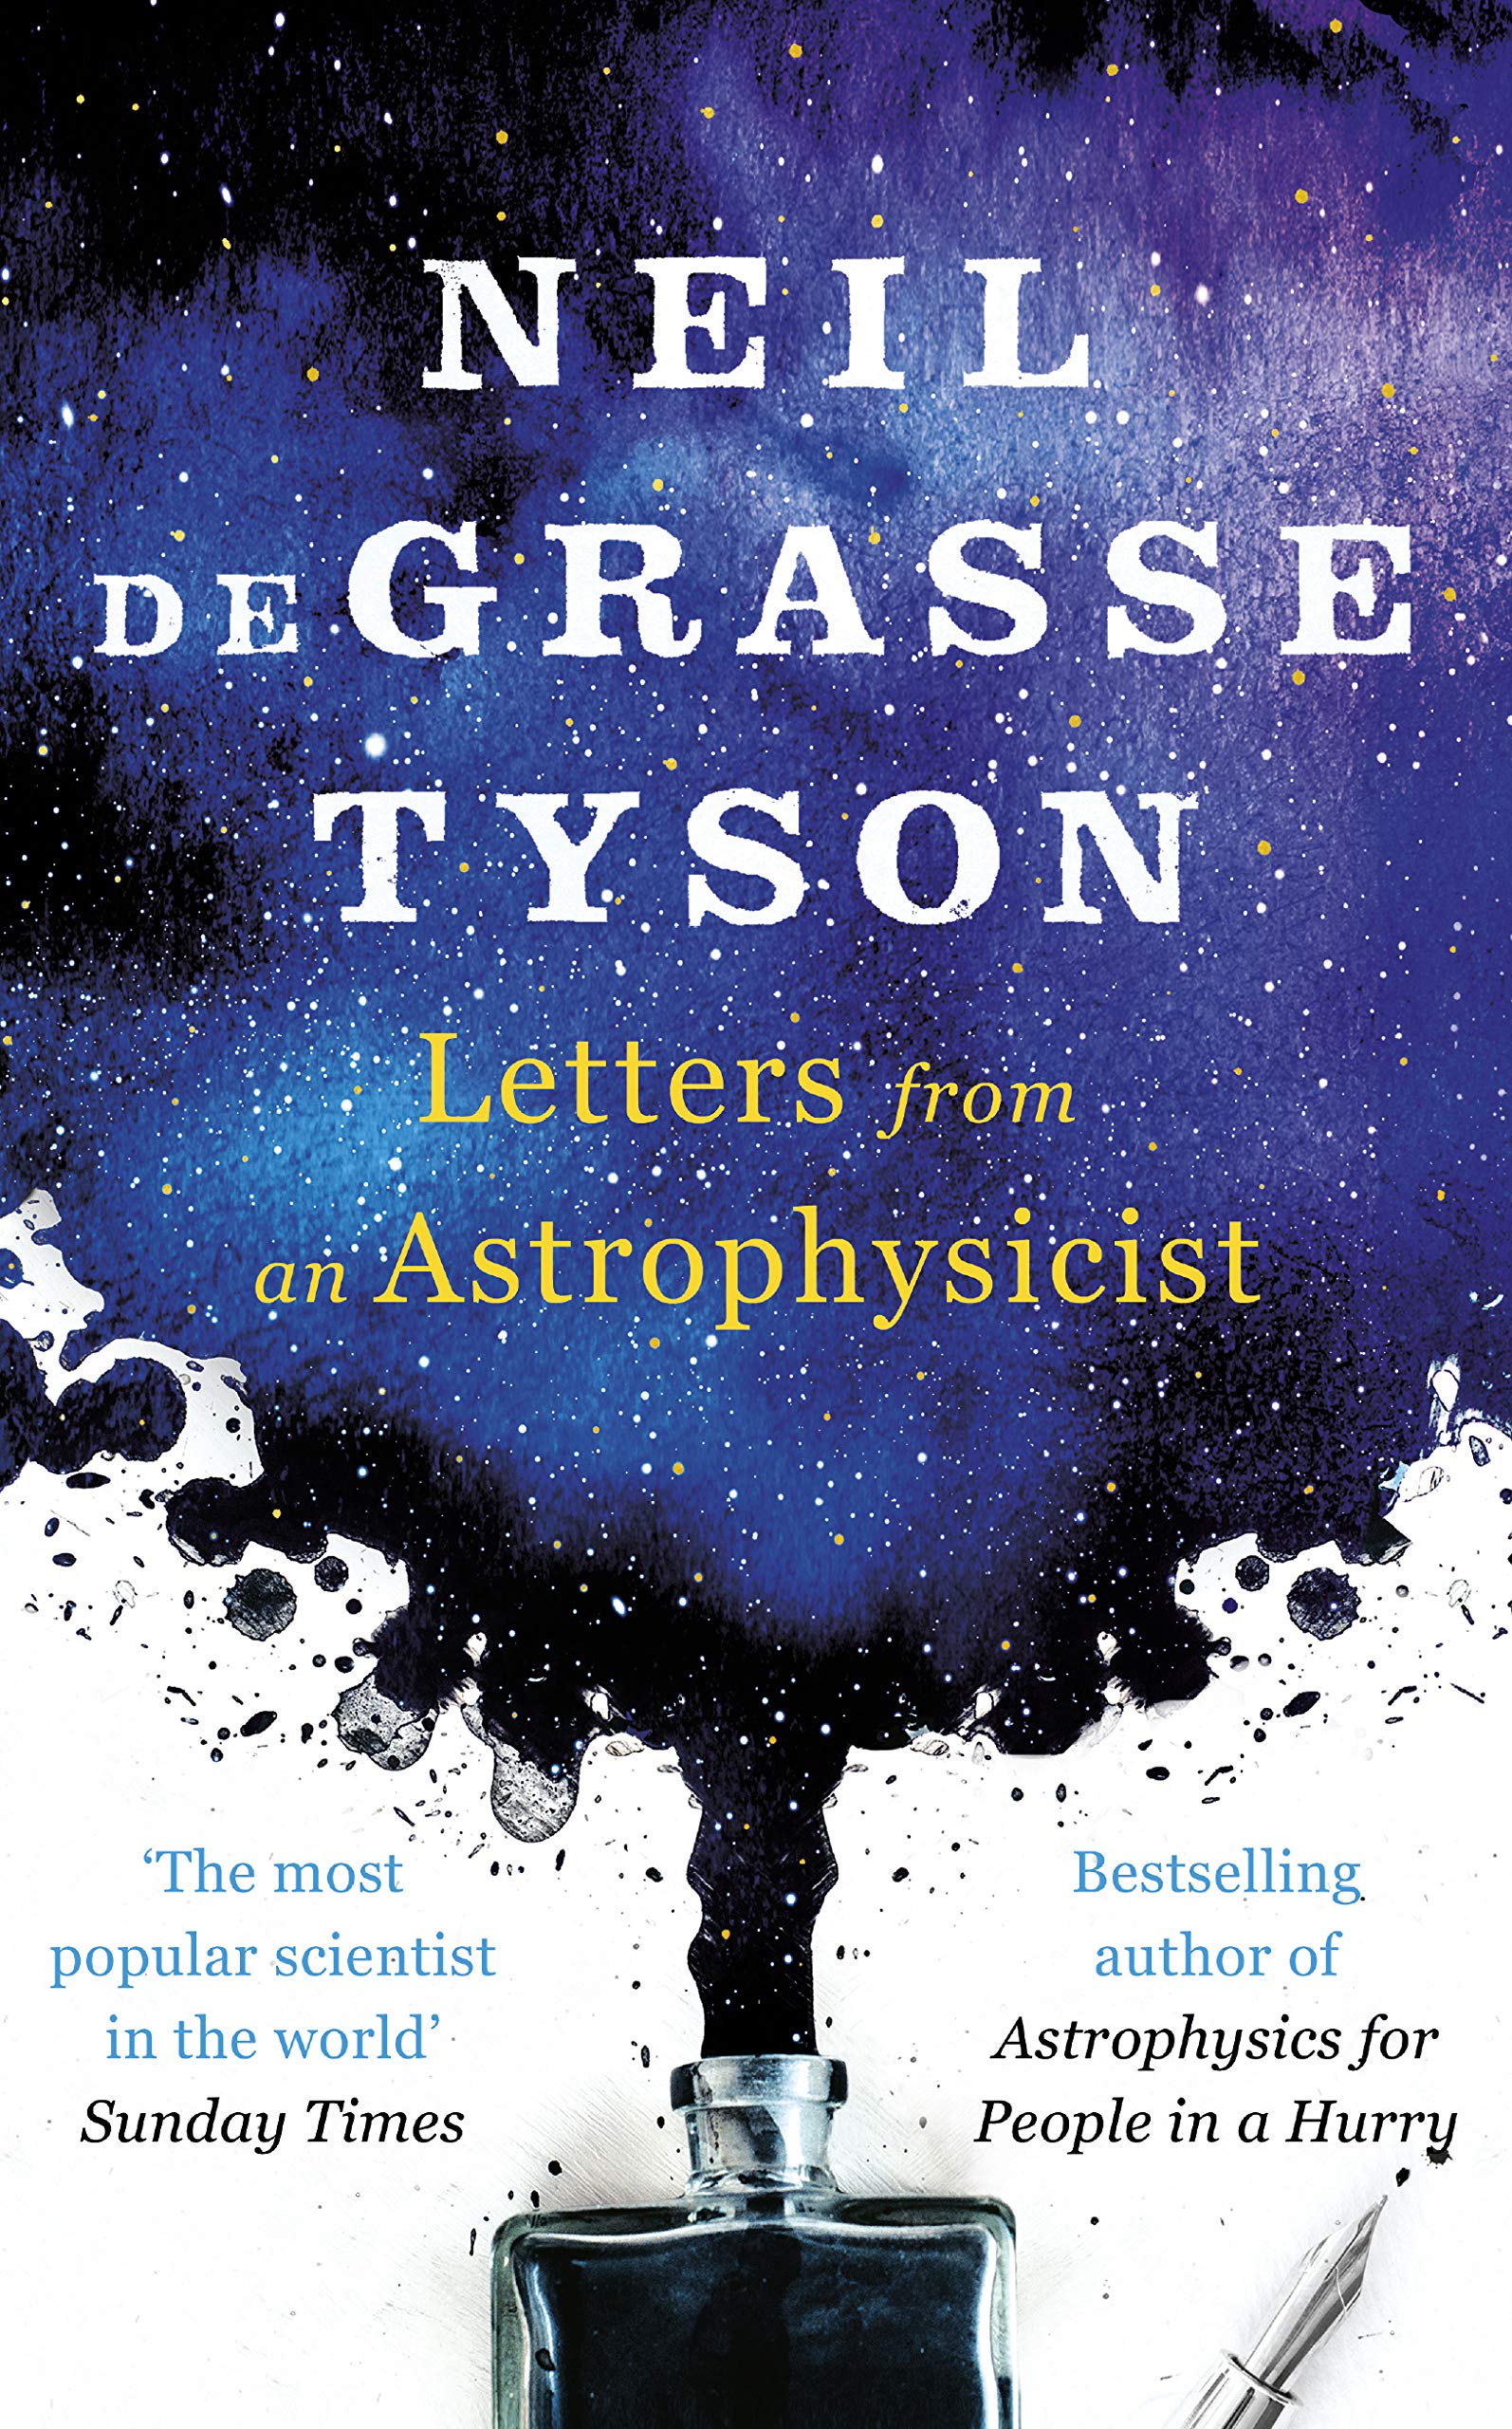 Letters from an Astrophysicist | Neil deGrasse Tyson